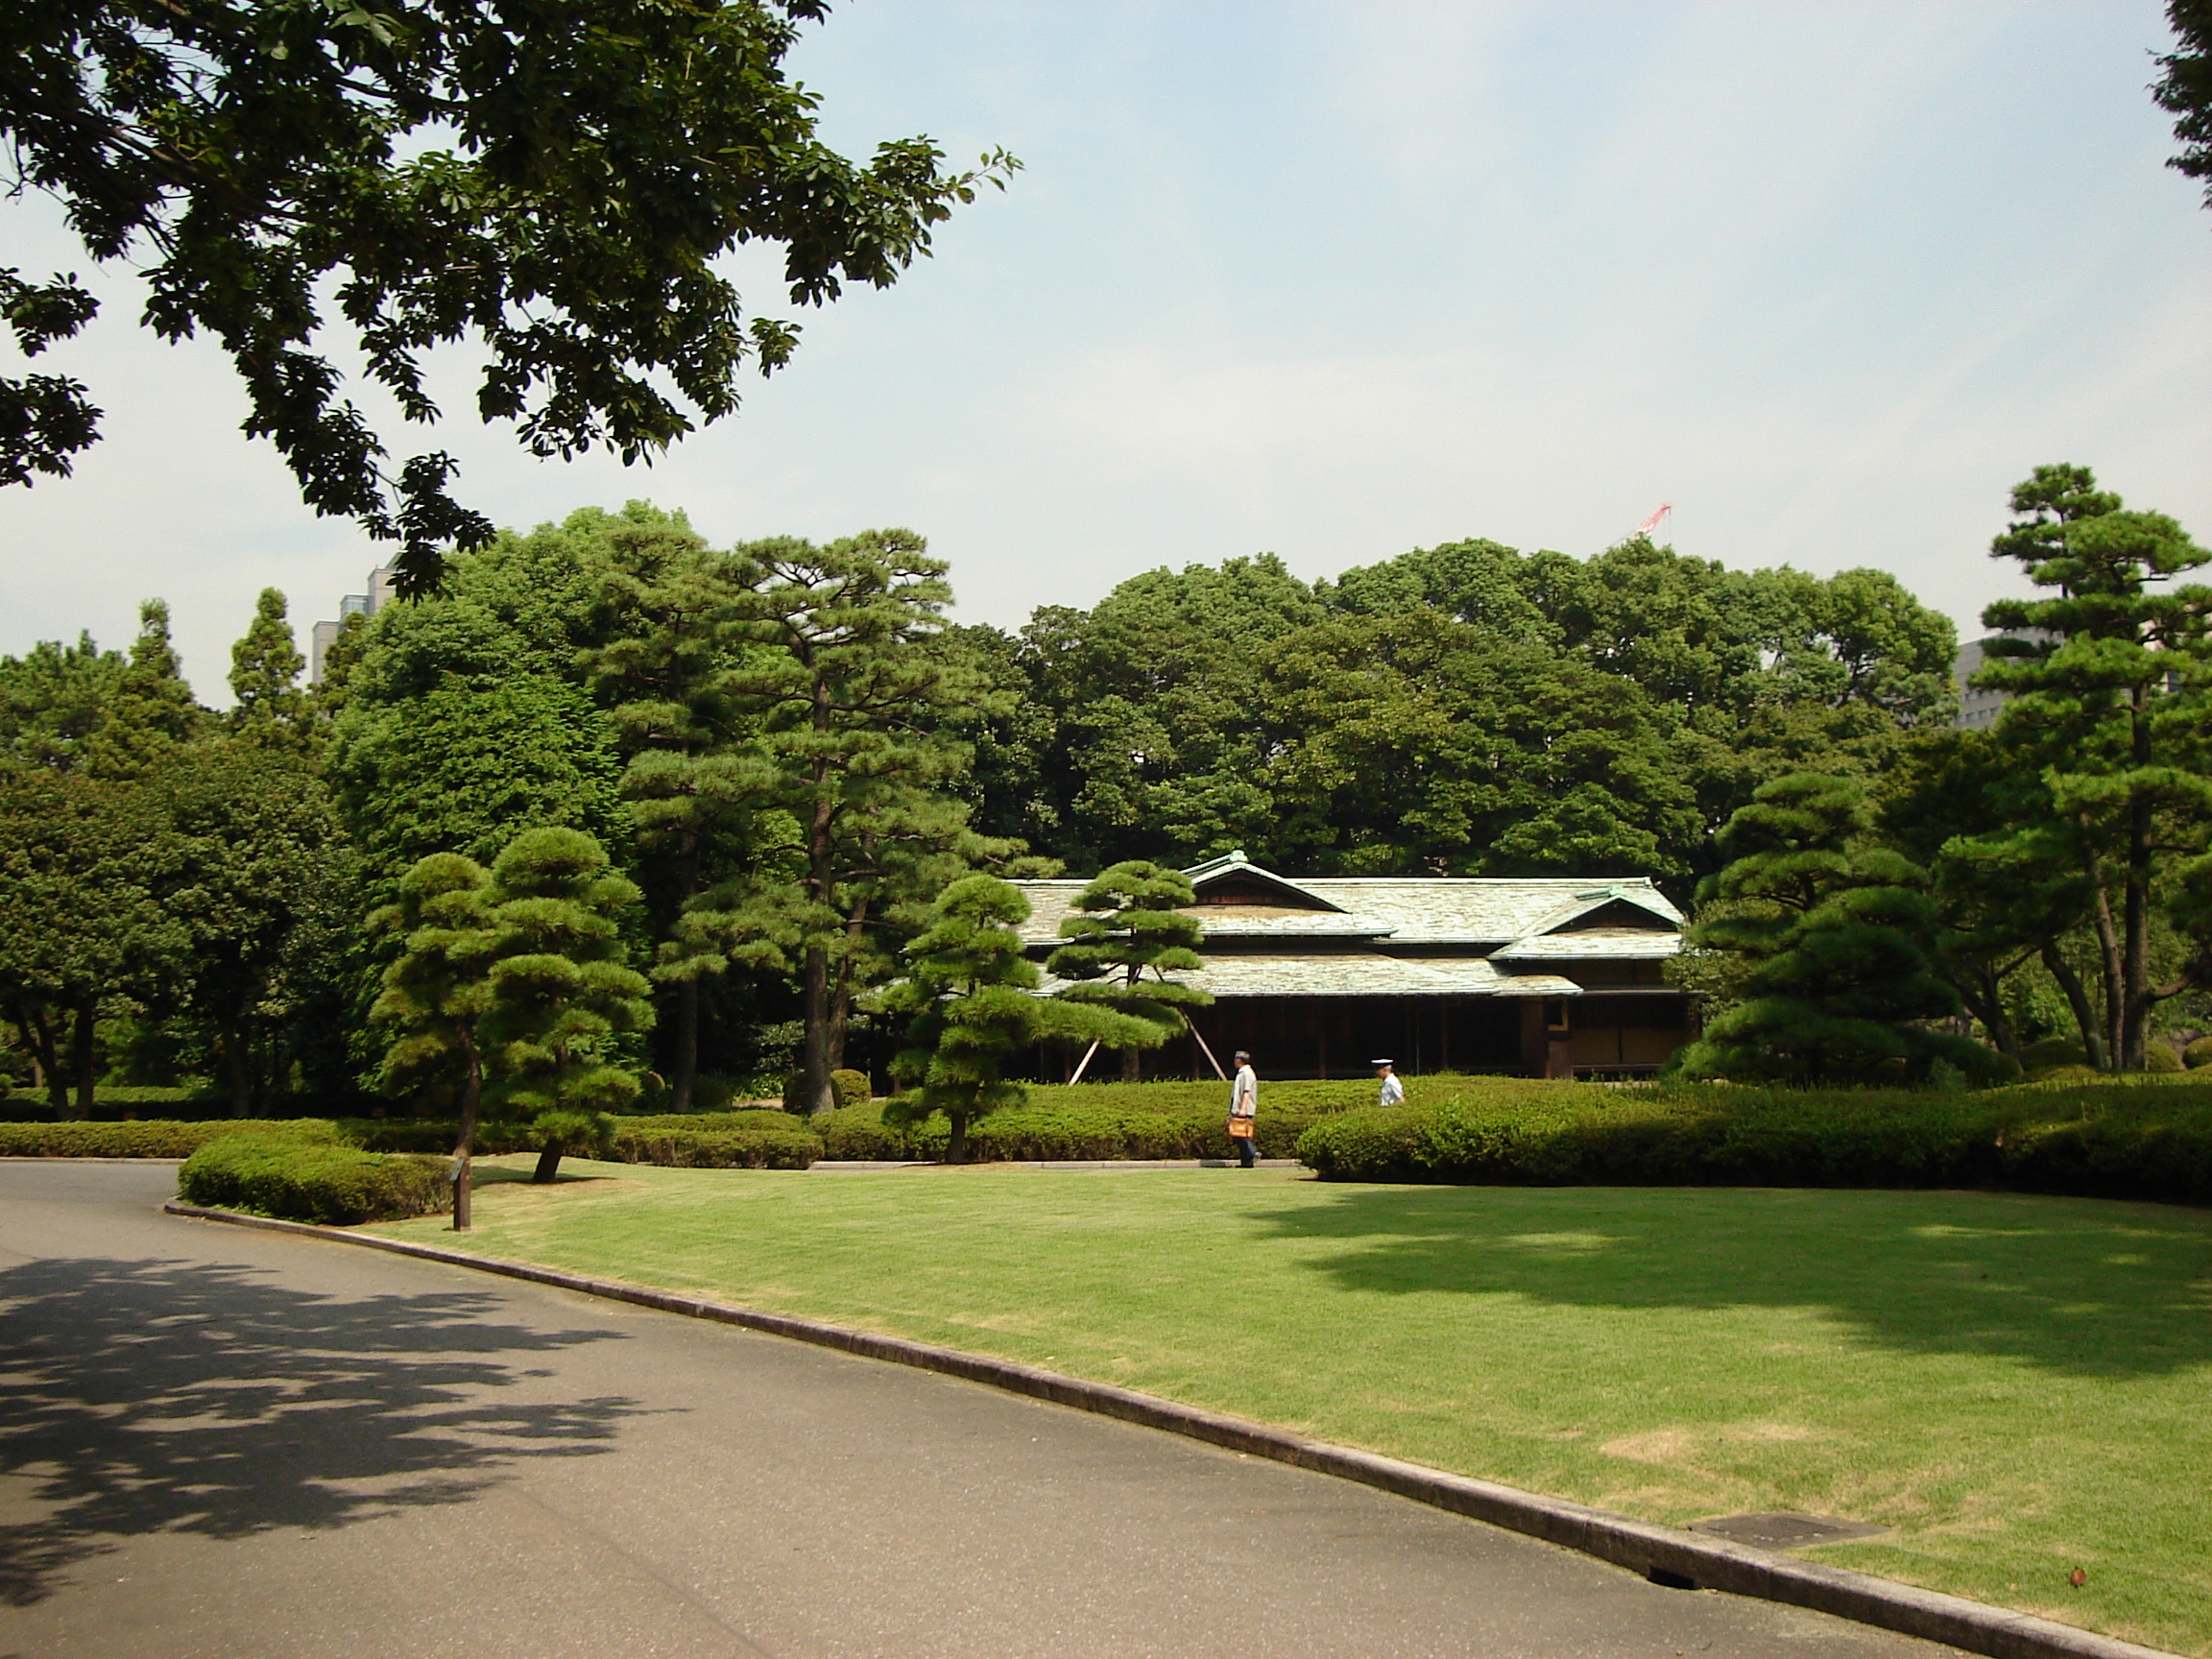 a building in the distance surrounded by trees